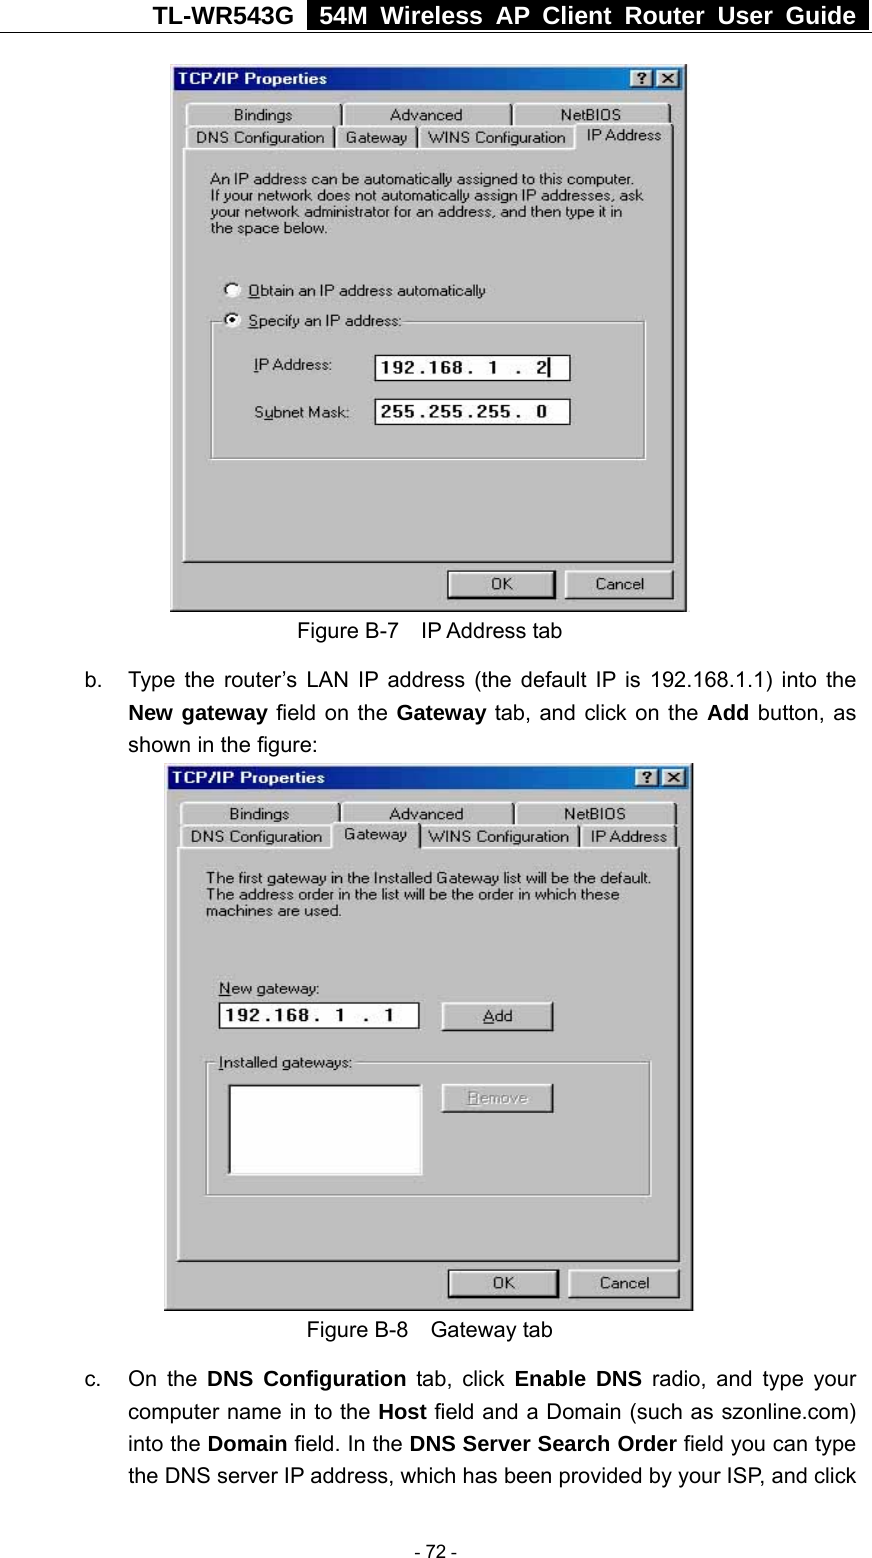 TL-WR543G   54M Wireless AP Client Router User Guide   Figure B-7  IP Address tab b.  Type the router’s LAN IP address (the default IP is 192.168.1.1) into the New gateway field on the Gateway tab, and click on the Add button, as shown in the figure:    Figure B-8  Gateway tab c. On the DNS Configuration tab, click Enable DNS radio, and type your computer name in to the Host field and a Domain (such as szonline.com) into the Domain field. In the DNS Server Search Order field you can type the DNS server IP address, which has been provided by your ISP, and click  - 72 - 